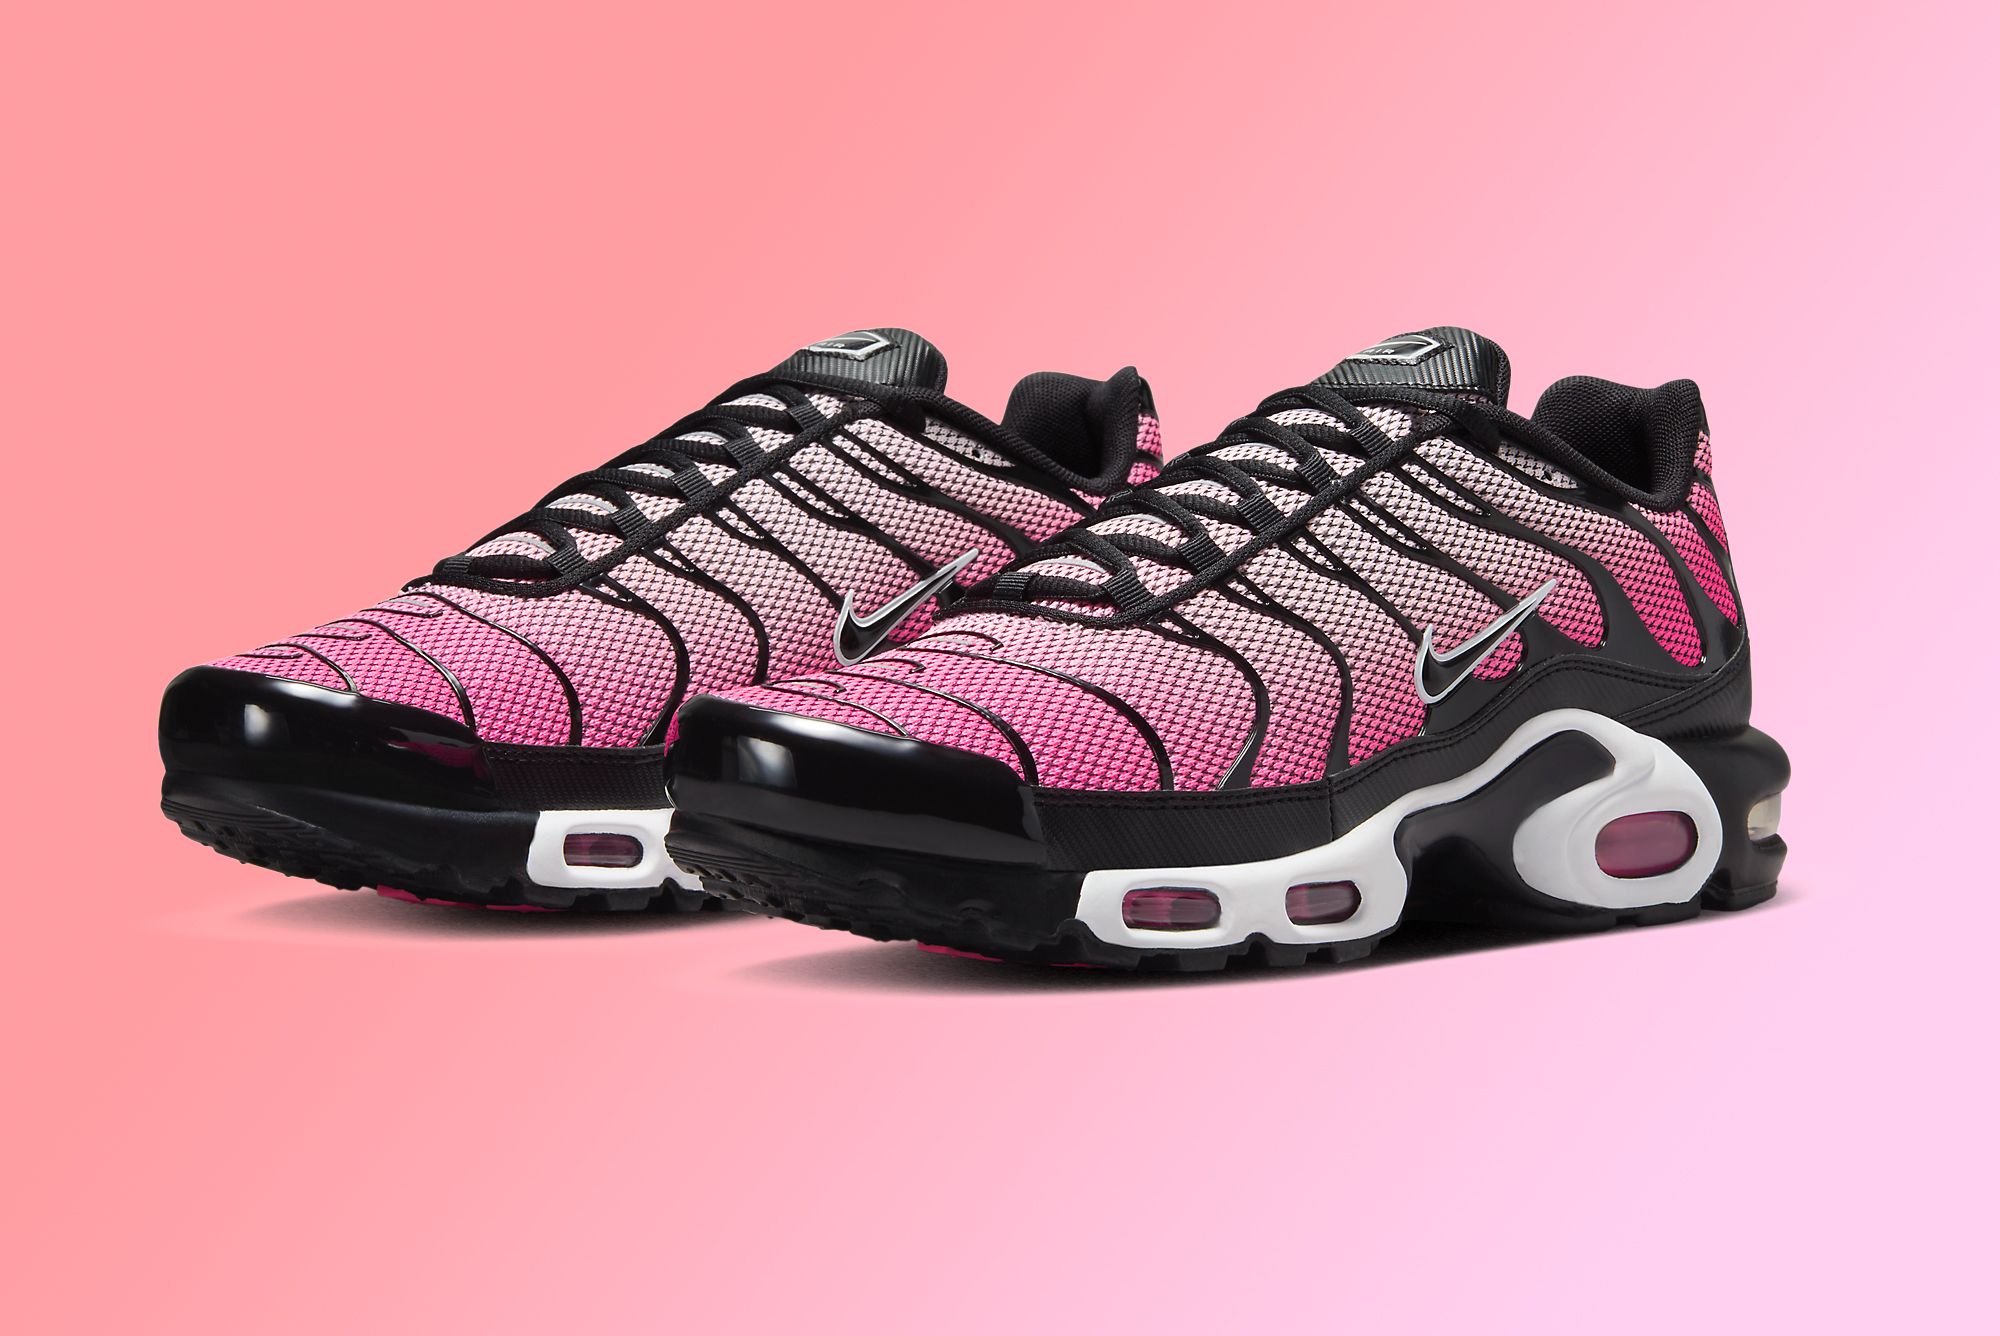 Nike Ready the Air Max Plus in 'All Day' Hot Pink Gradient - Sneaker ...